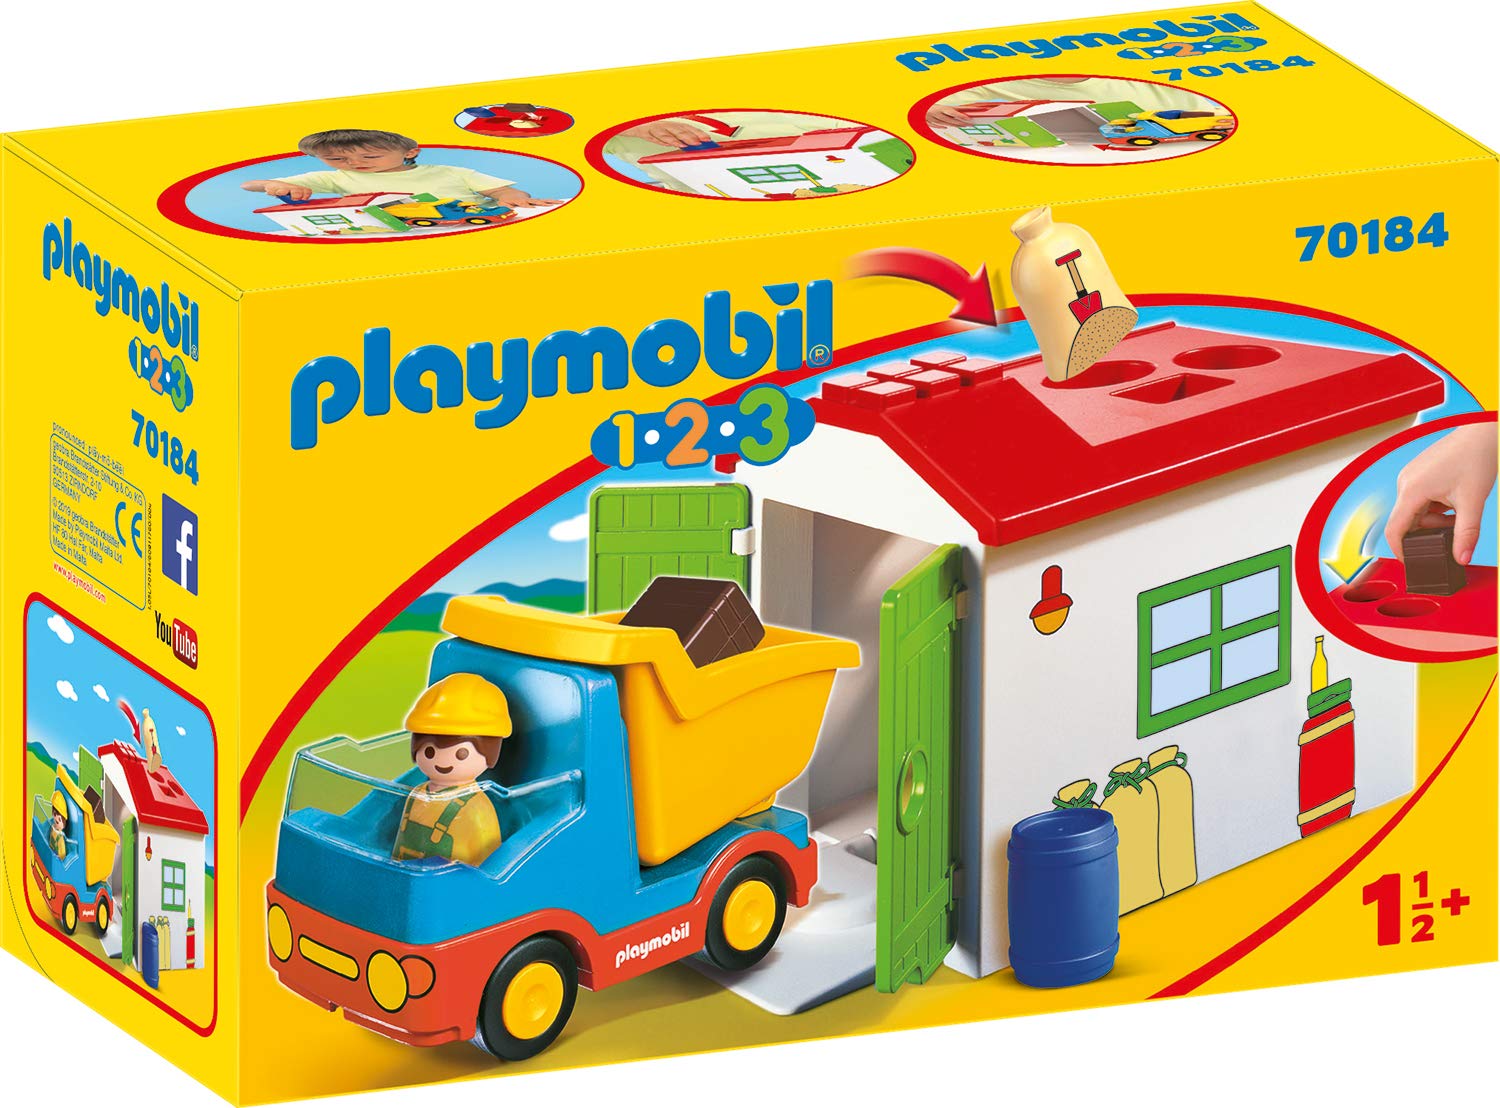 Playmobil 70184 1.2.3 Truck With Sorting Garage Multi-Coloured